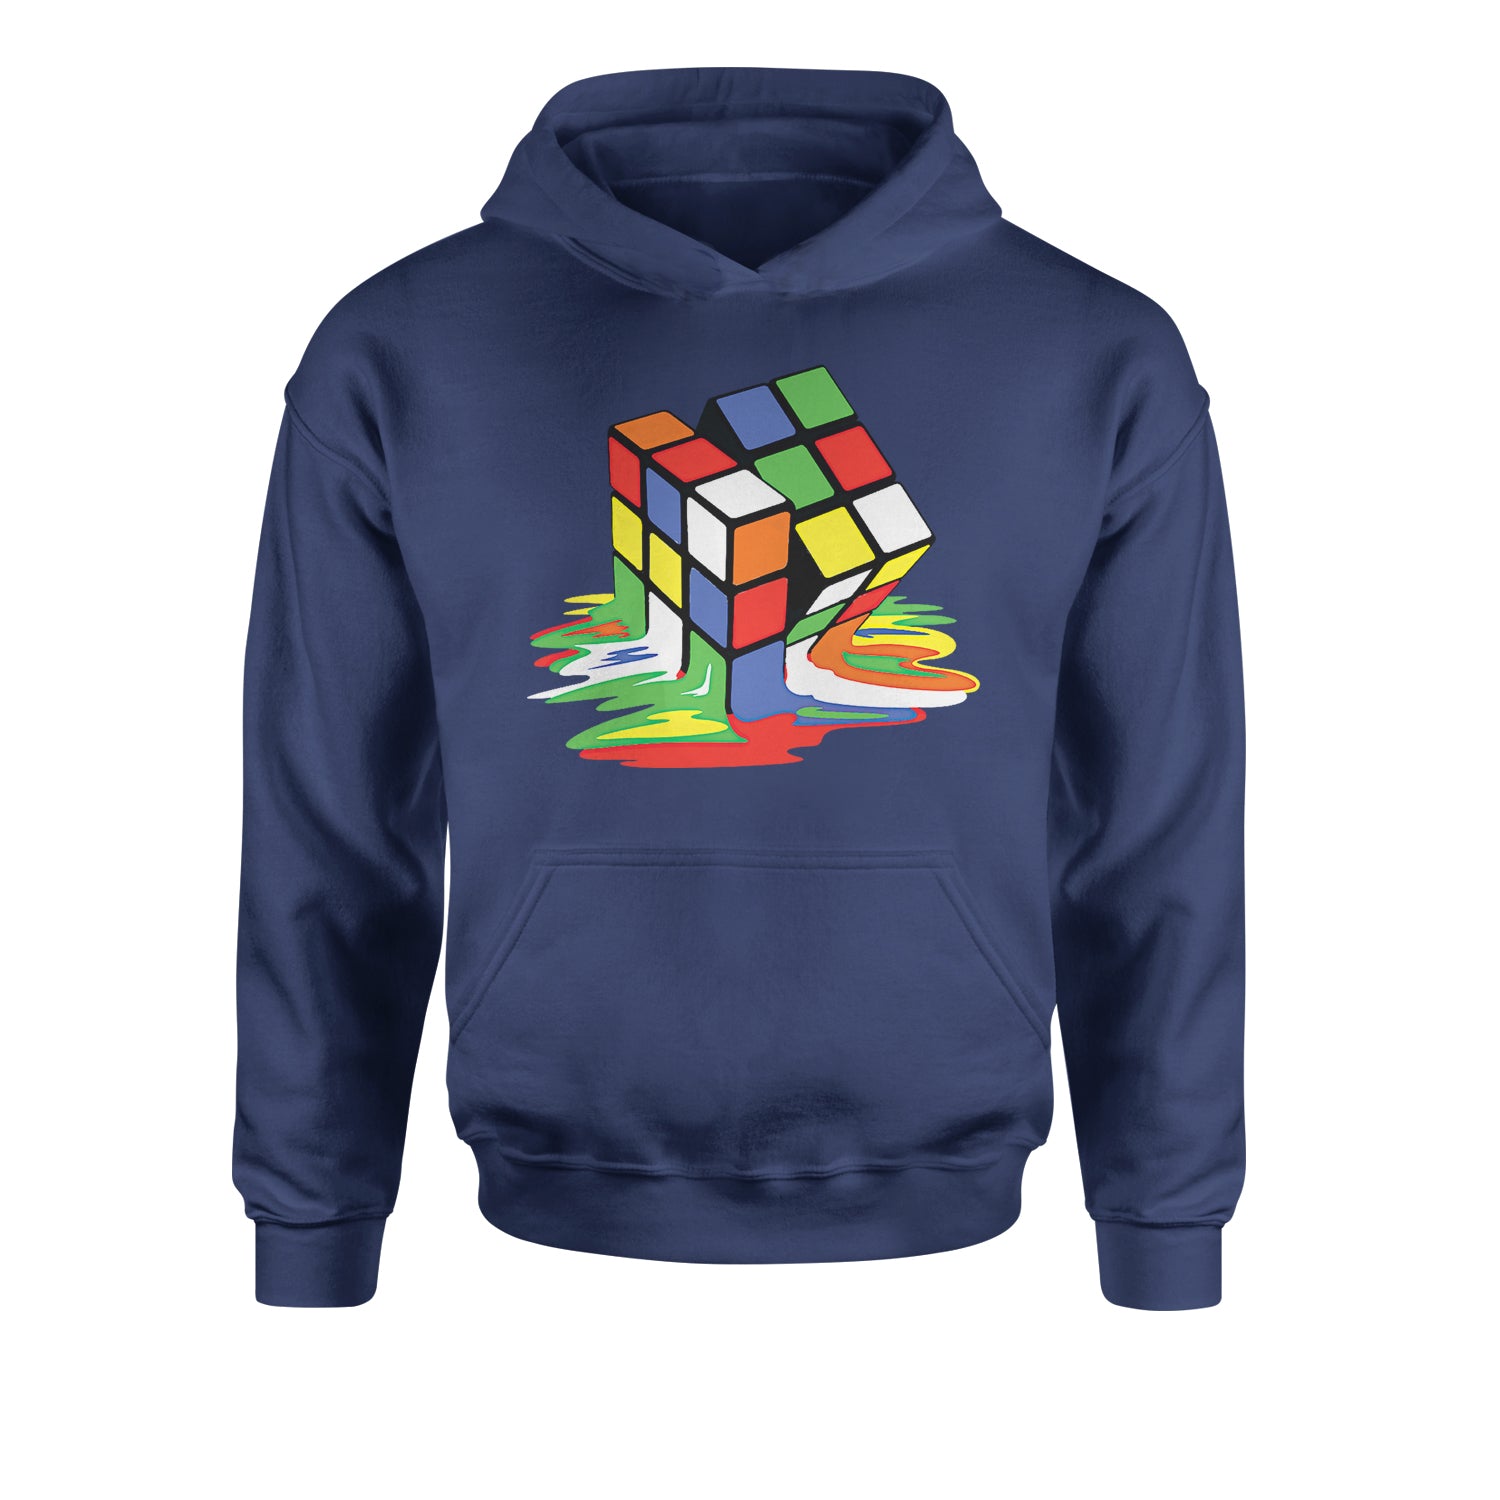 Melting Multi-Colored Cube Youth-Sized Hoodie gamer, gaming, nerd, shirt by Expression Tees